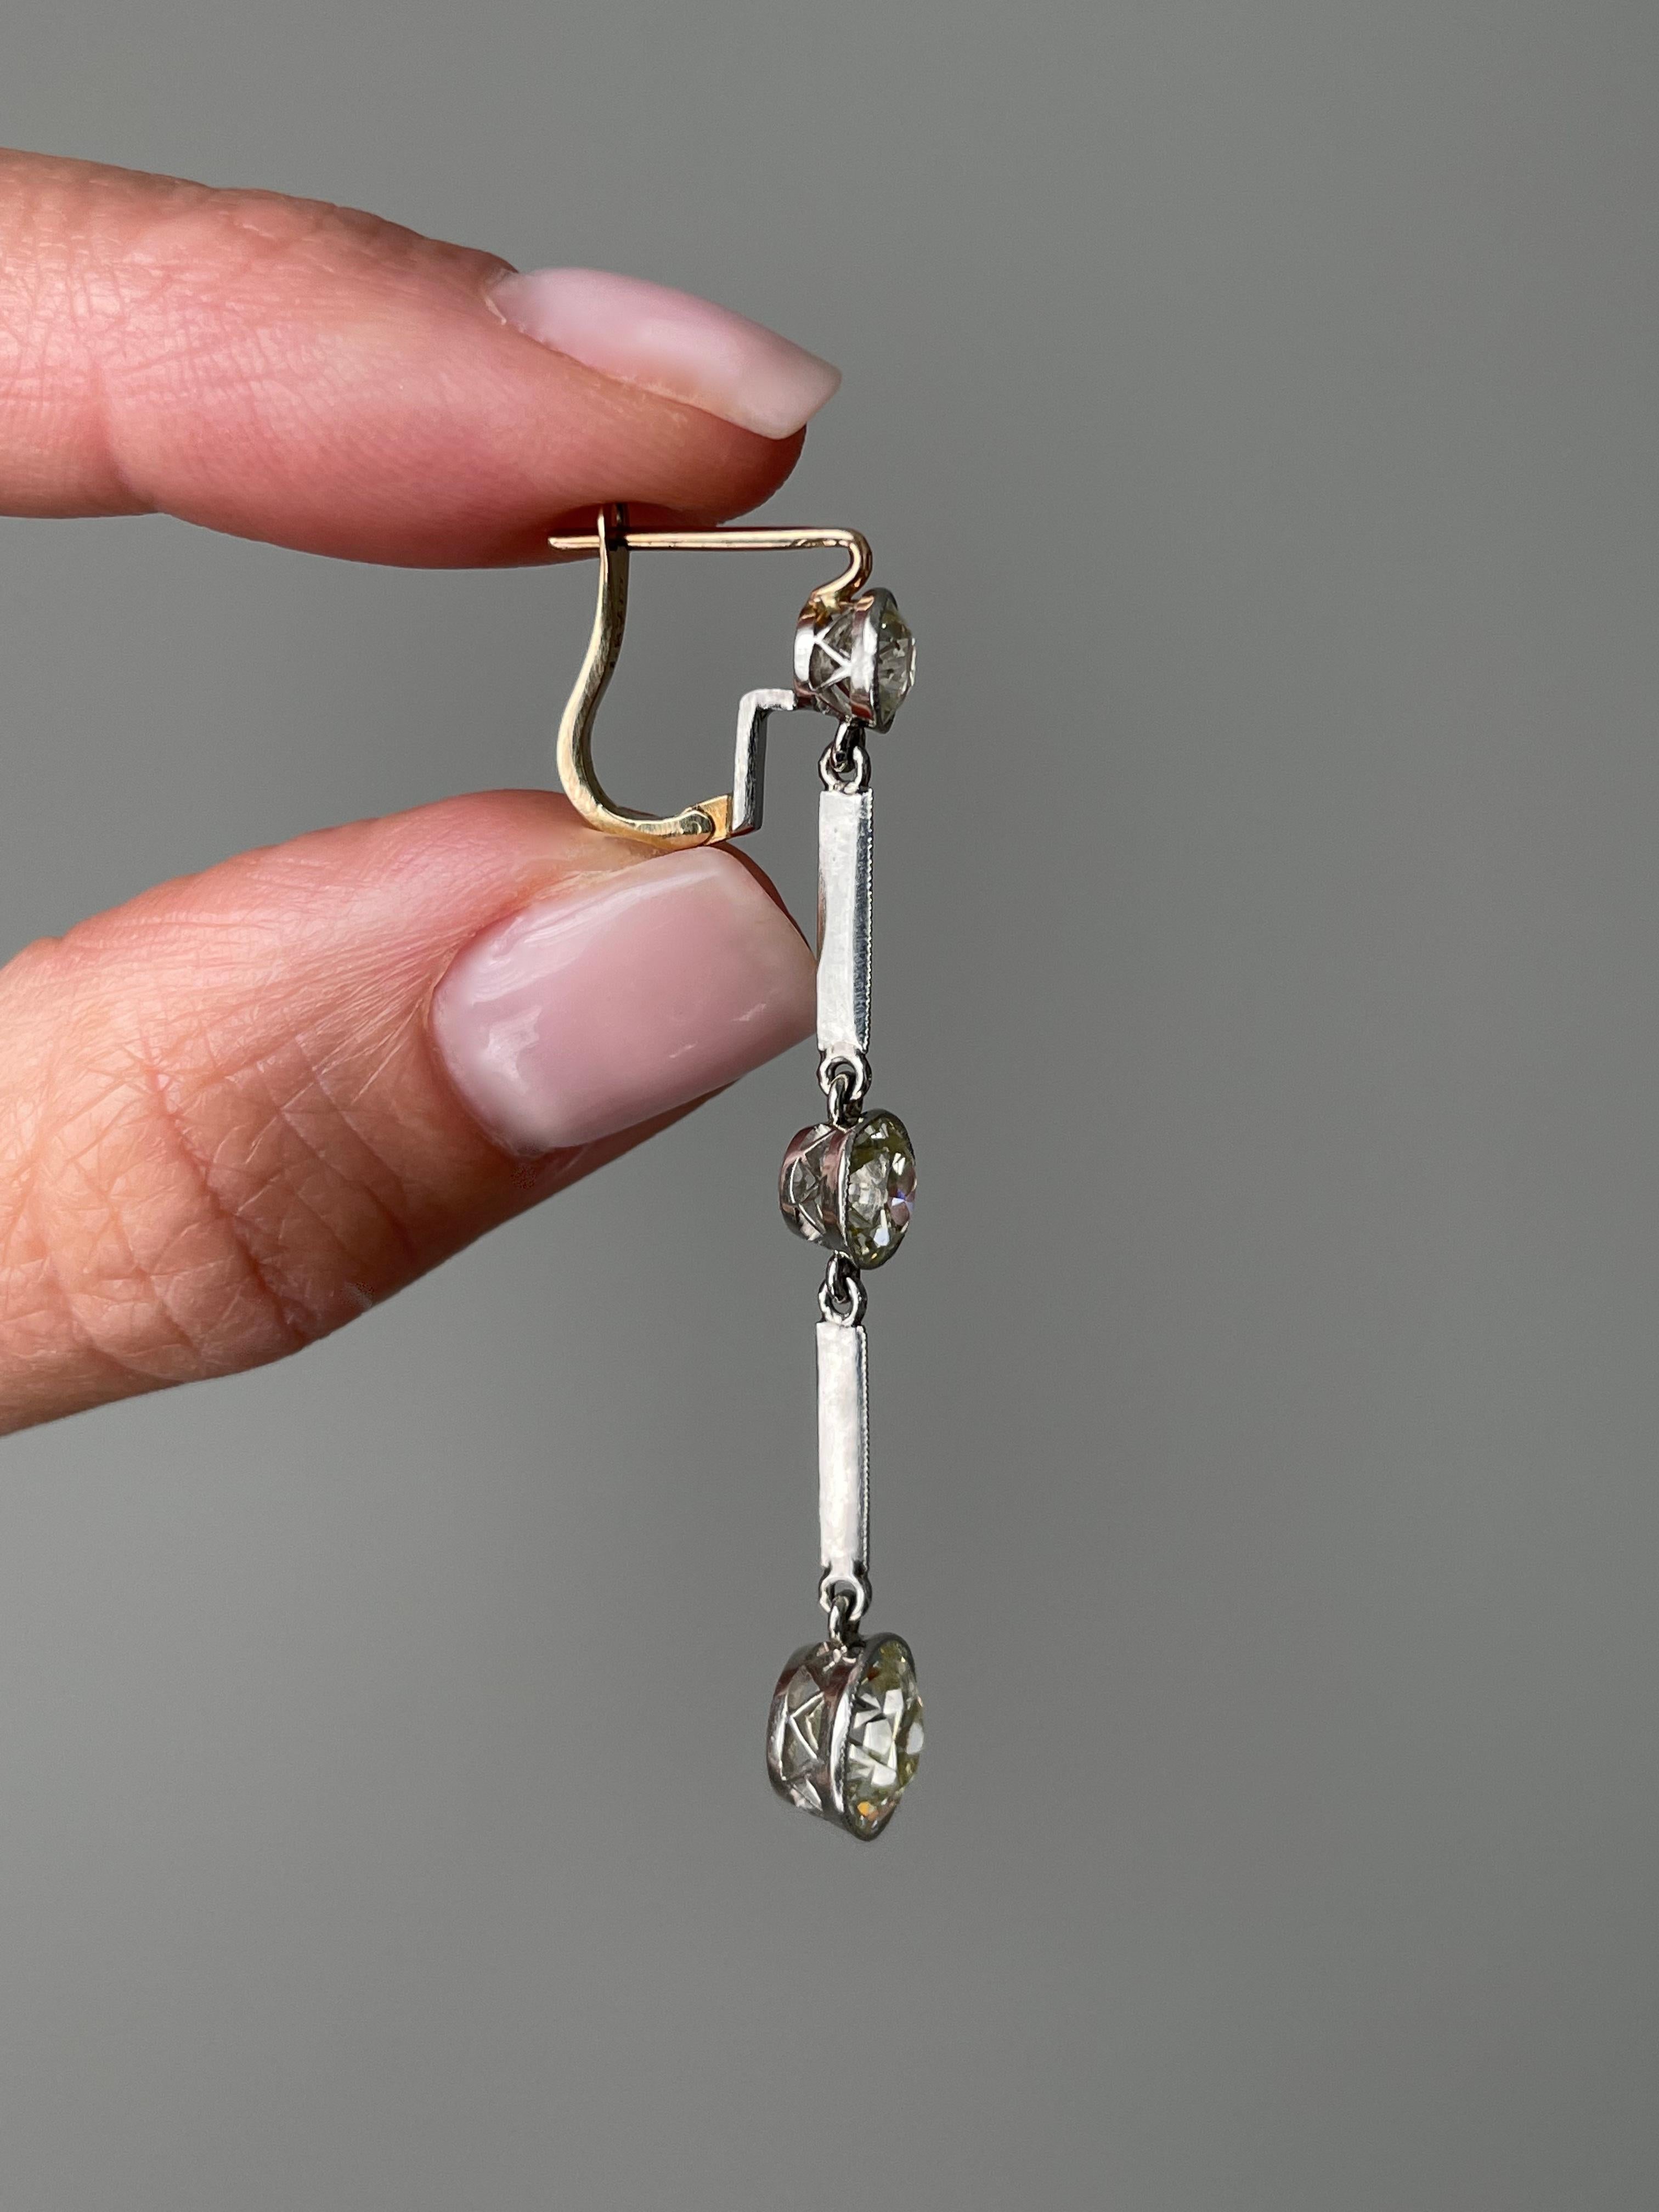 These fabulous 1930s drop earrings swing and sway with an articulated line of 6.34 carats of sparkling European-cut diamonds, spaced by slender knife wires. Artfully fabricated in platinum and 18k gold, these beauties measure a dramatic 2 1/16